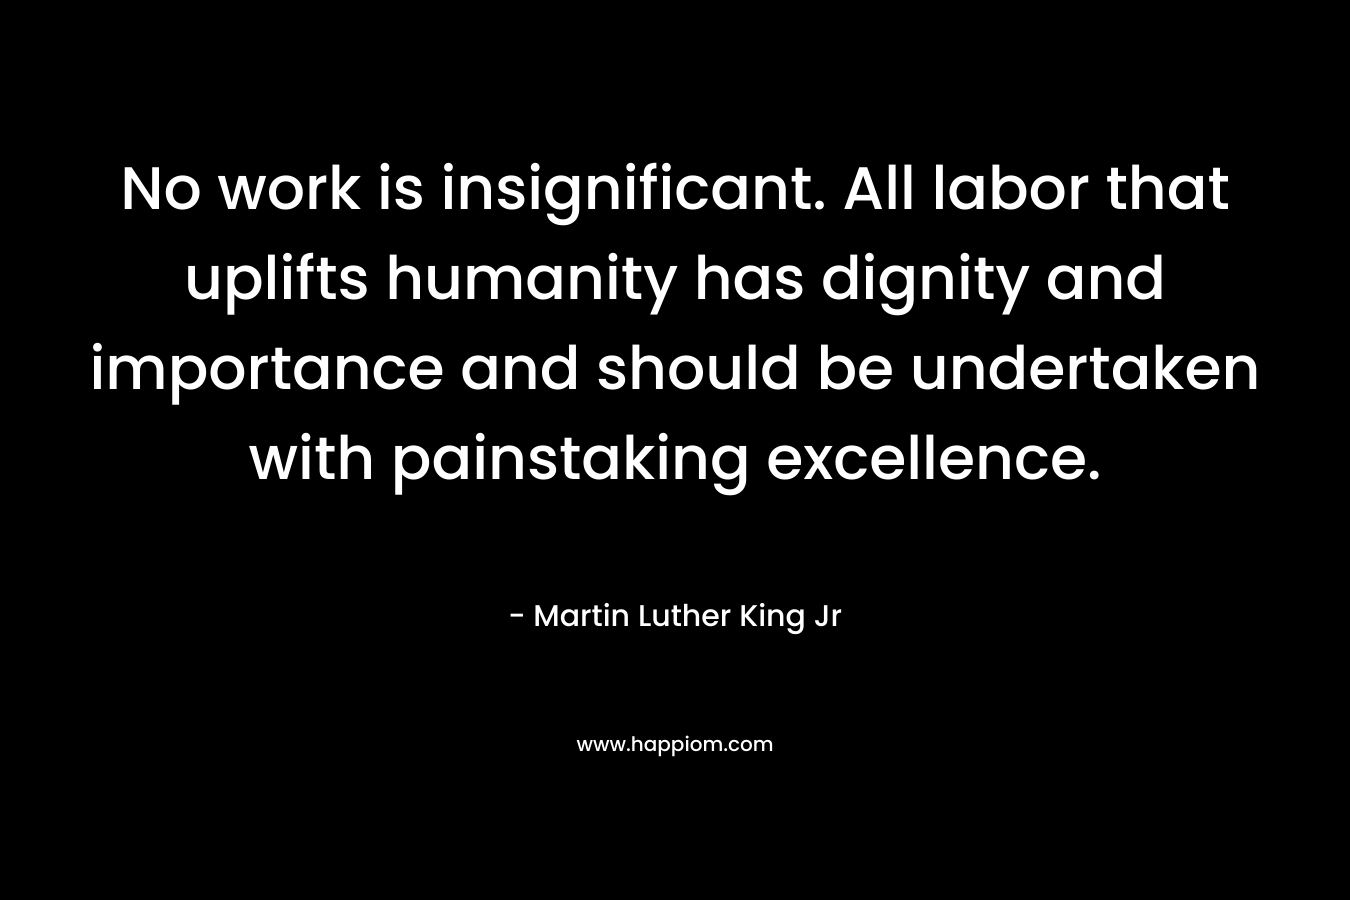 No work is insignificant. All labor that uplifts humanity has dignity and importance and should be undertaken with painstaking excellence. – Martin Luther King Jr